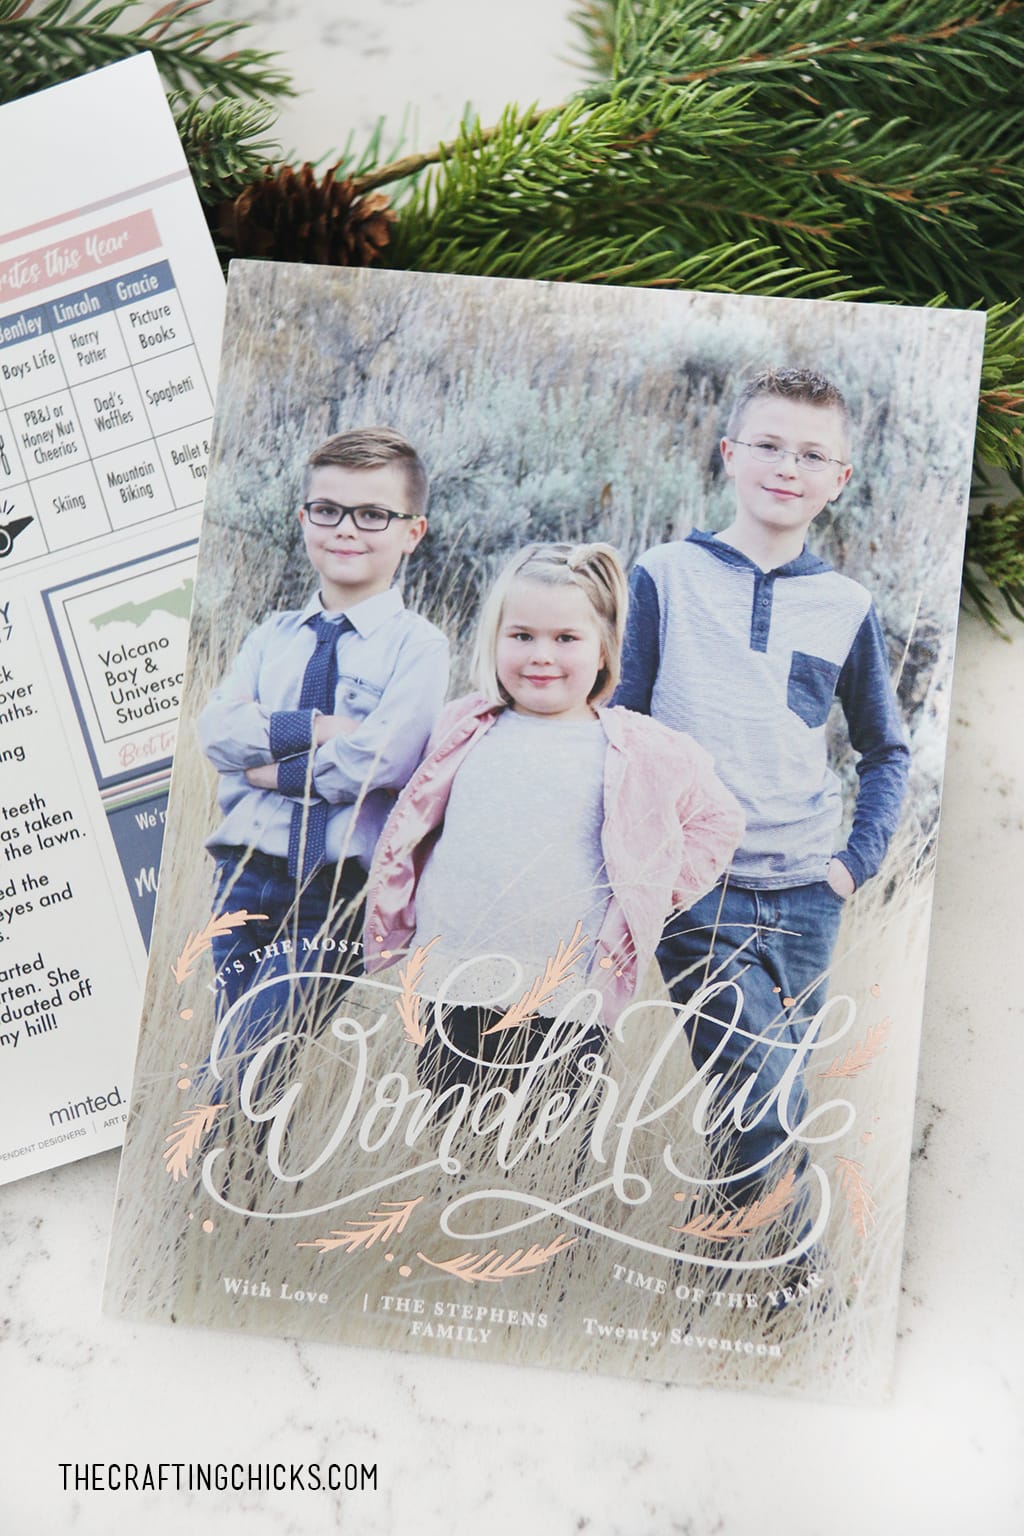 We are excited to show you our Holiday Photo Cards 2017! Each card was hand picked and made especially for each family. They are custom Christmas cards with foil printing. We think you'll love them as much as we do.